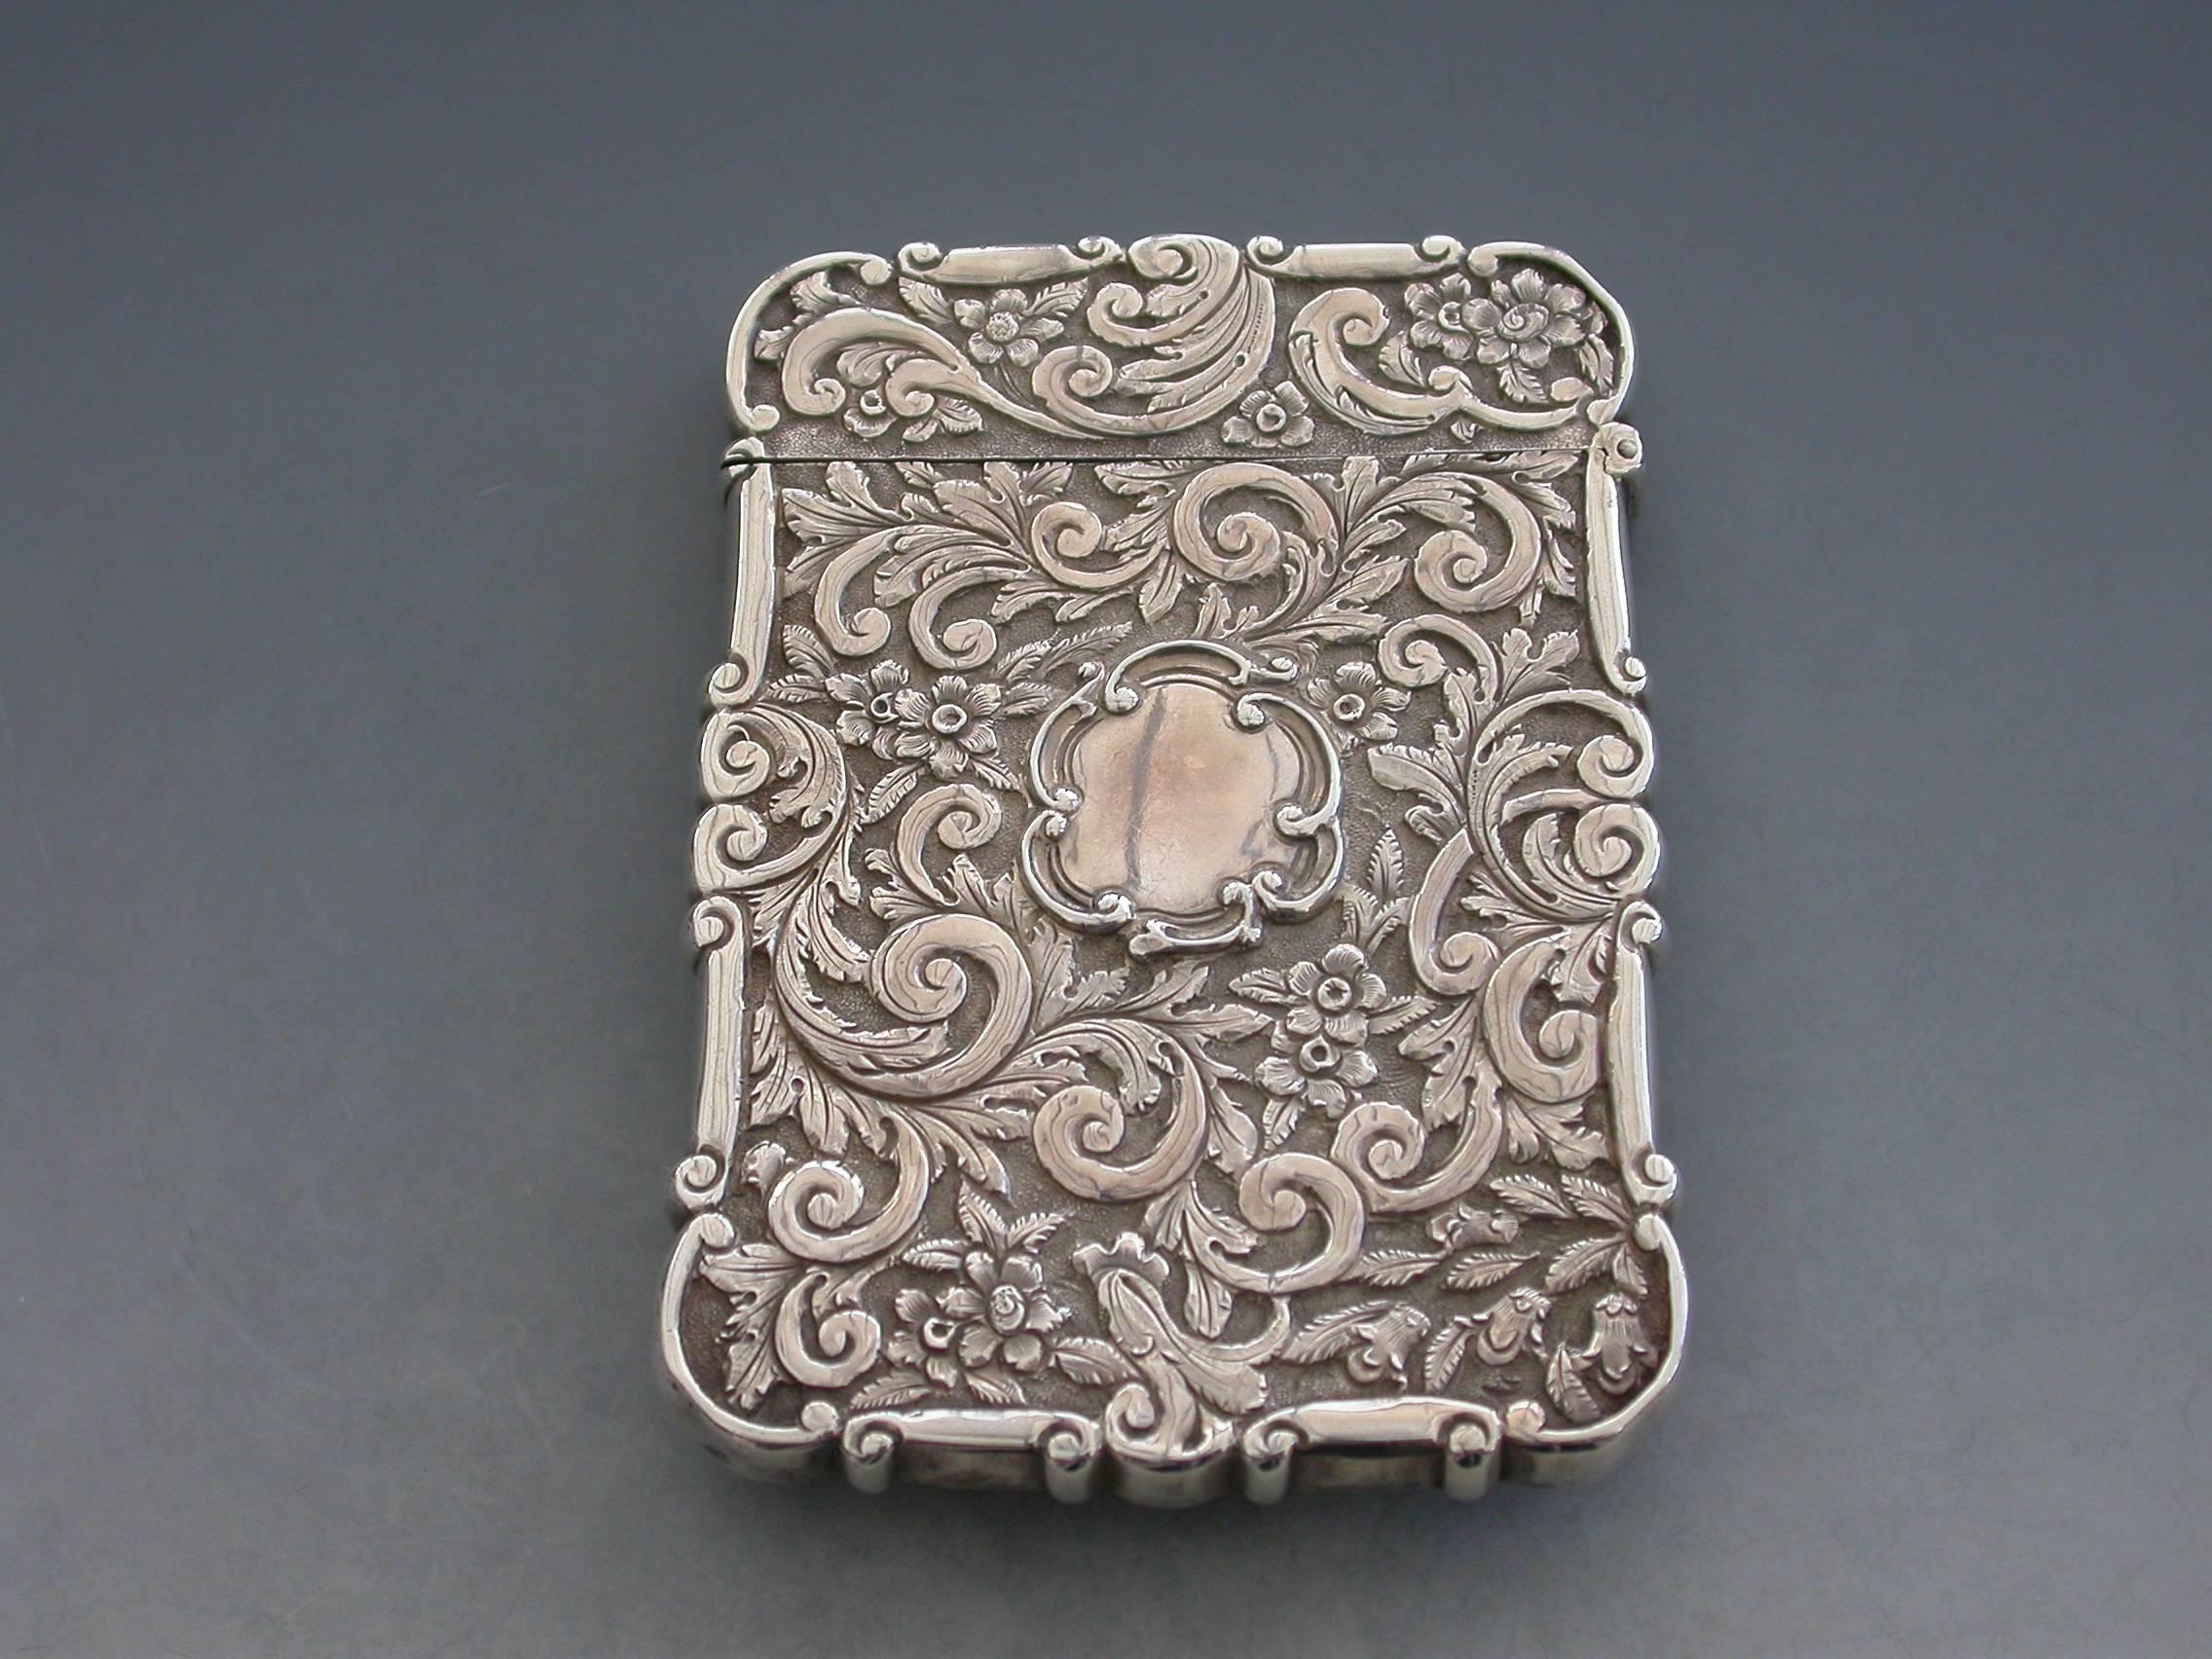 A rare Victorian silver castle-top card case of shaped rectangular form with chased and embossed foliate scroll decoration, the front with a scene depicting Osborne House in high relief. The reverse with a vacant shaped cartouche.

By Edward